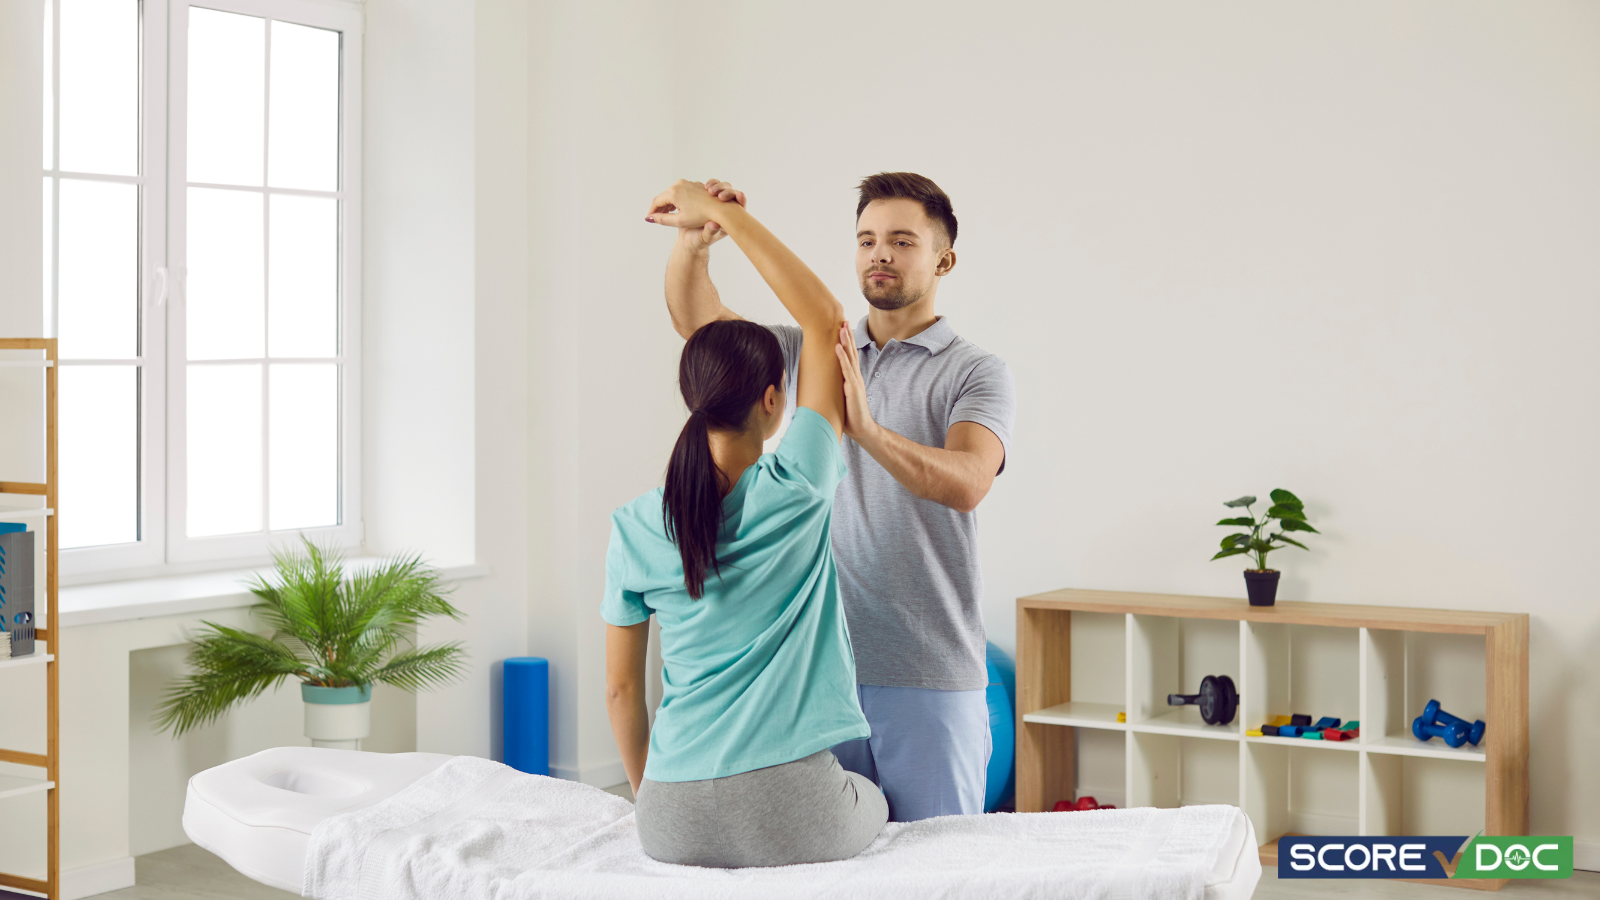 10 Top-Rated Chiropractor Clinics in Nashville, TN